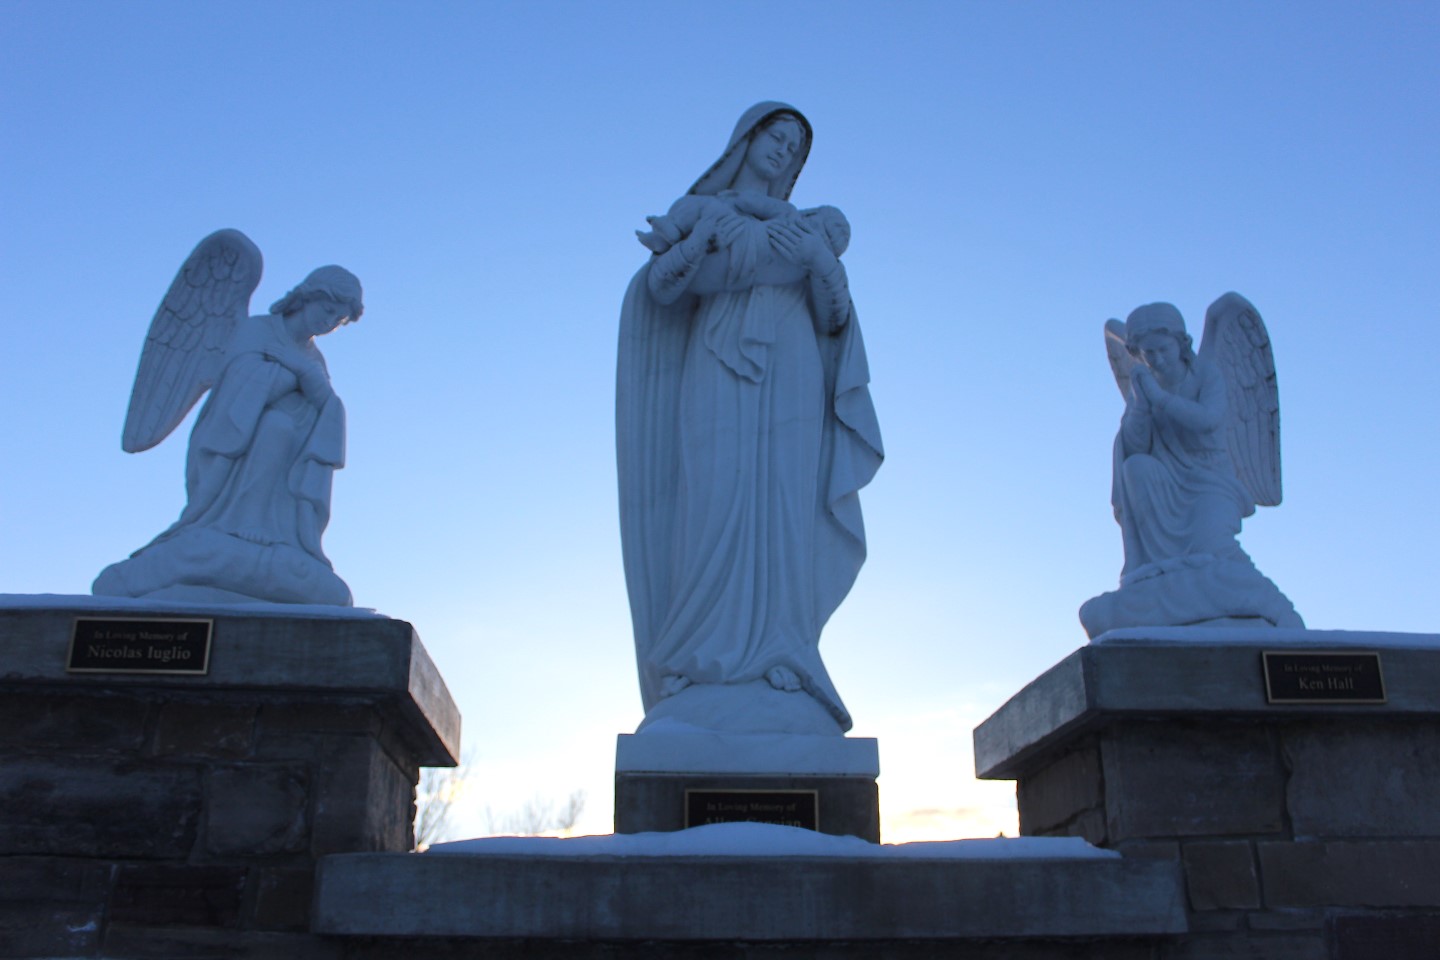 Cemetery monument with 3 large marble statues. 1 Angels on each sied, kneeling and looking into a Statue of the Virgin Mary holding the baby Jesus